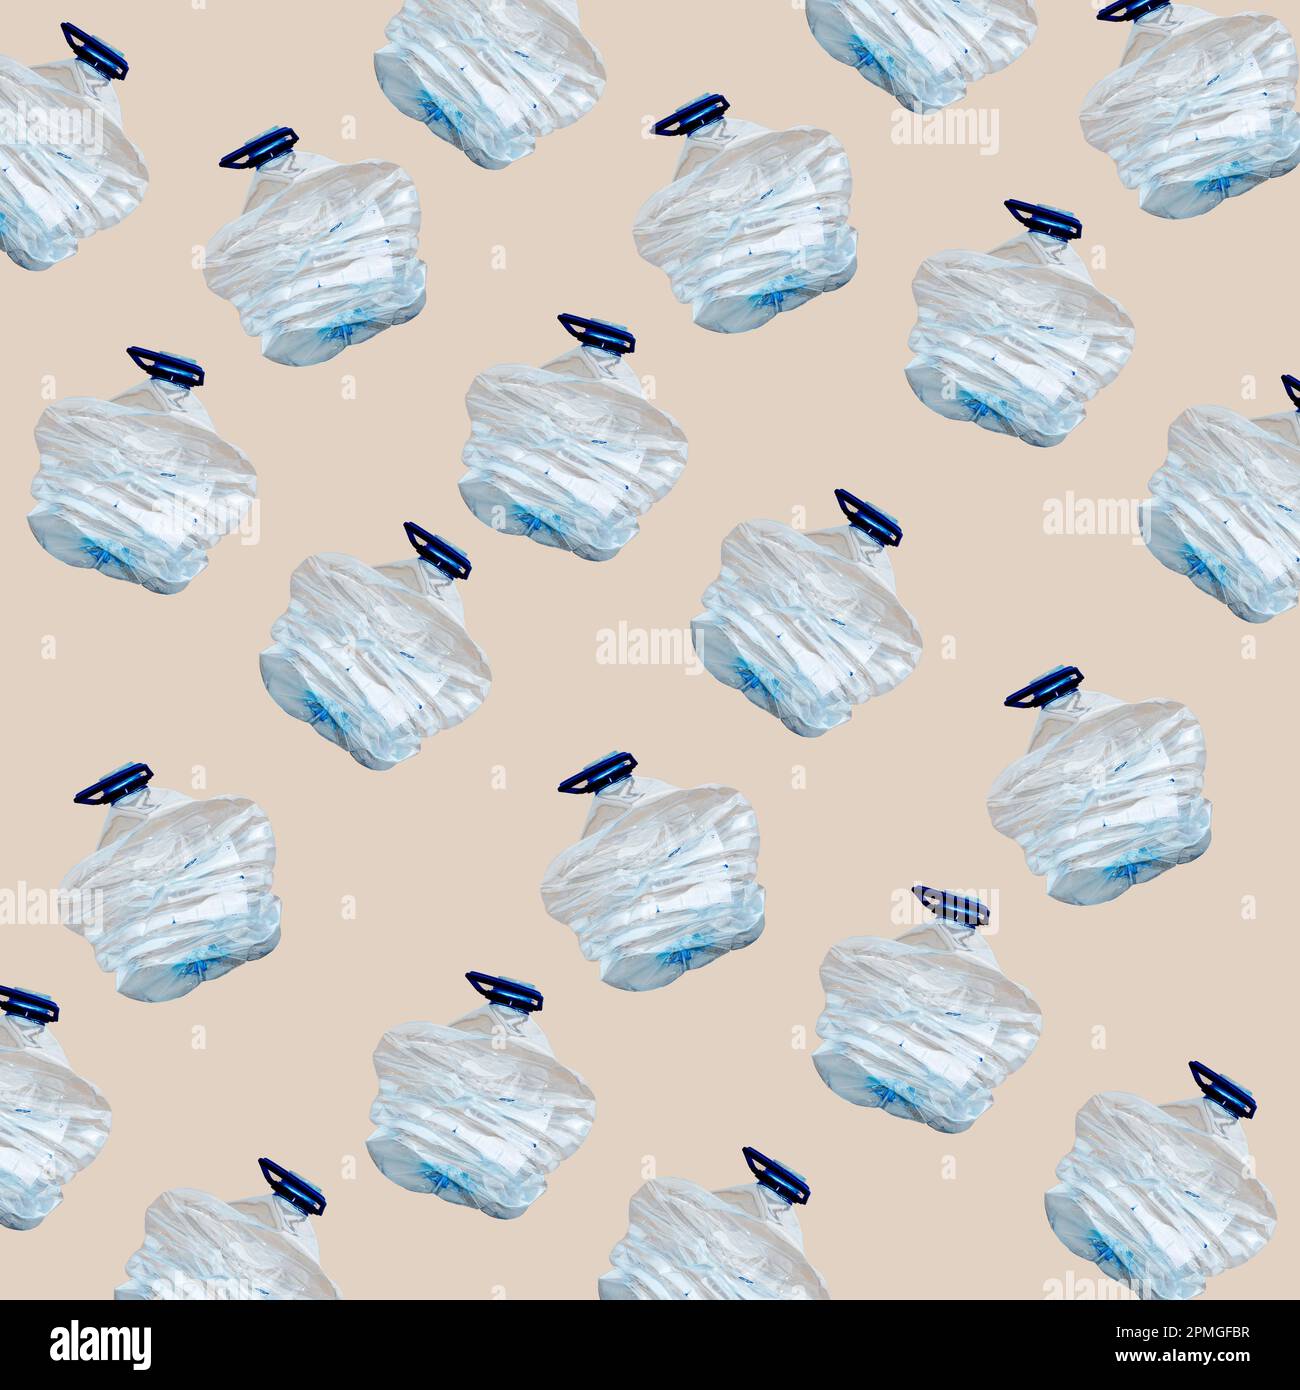 some smashed used plastic bottles on a beige background Stock Photo